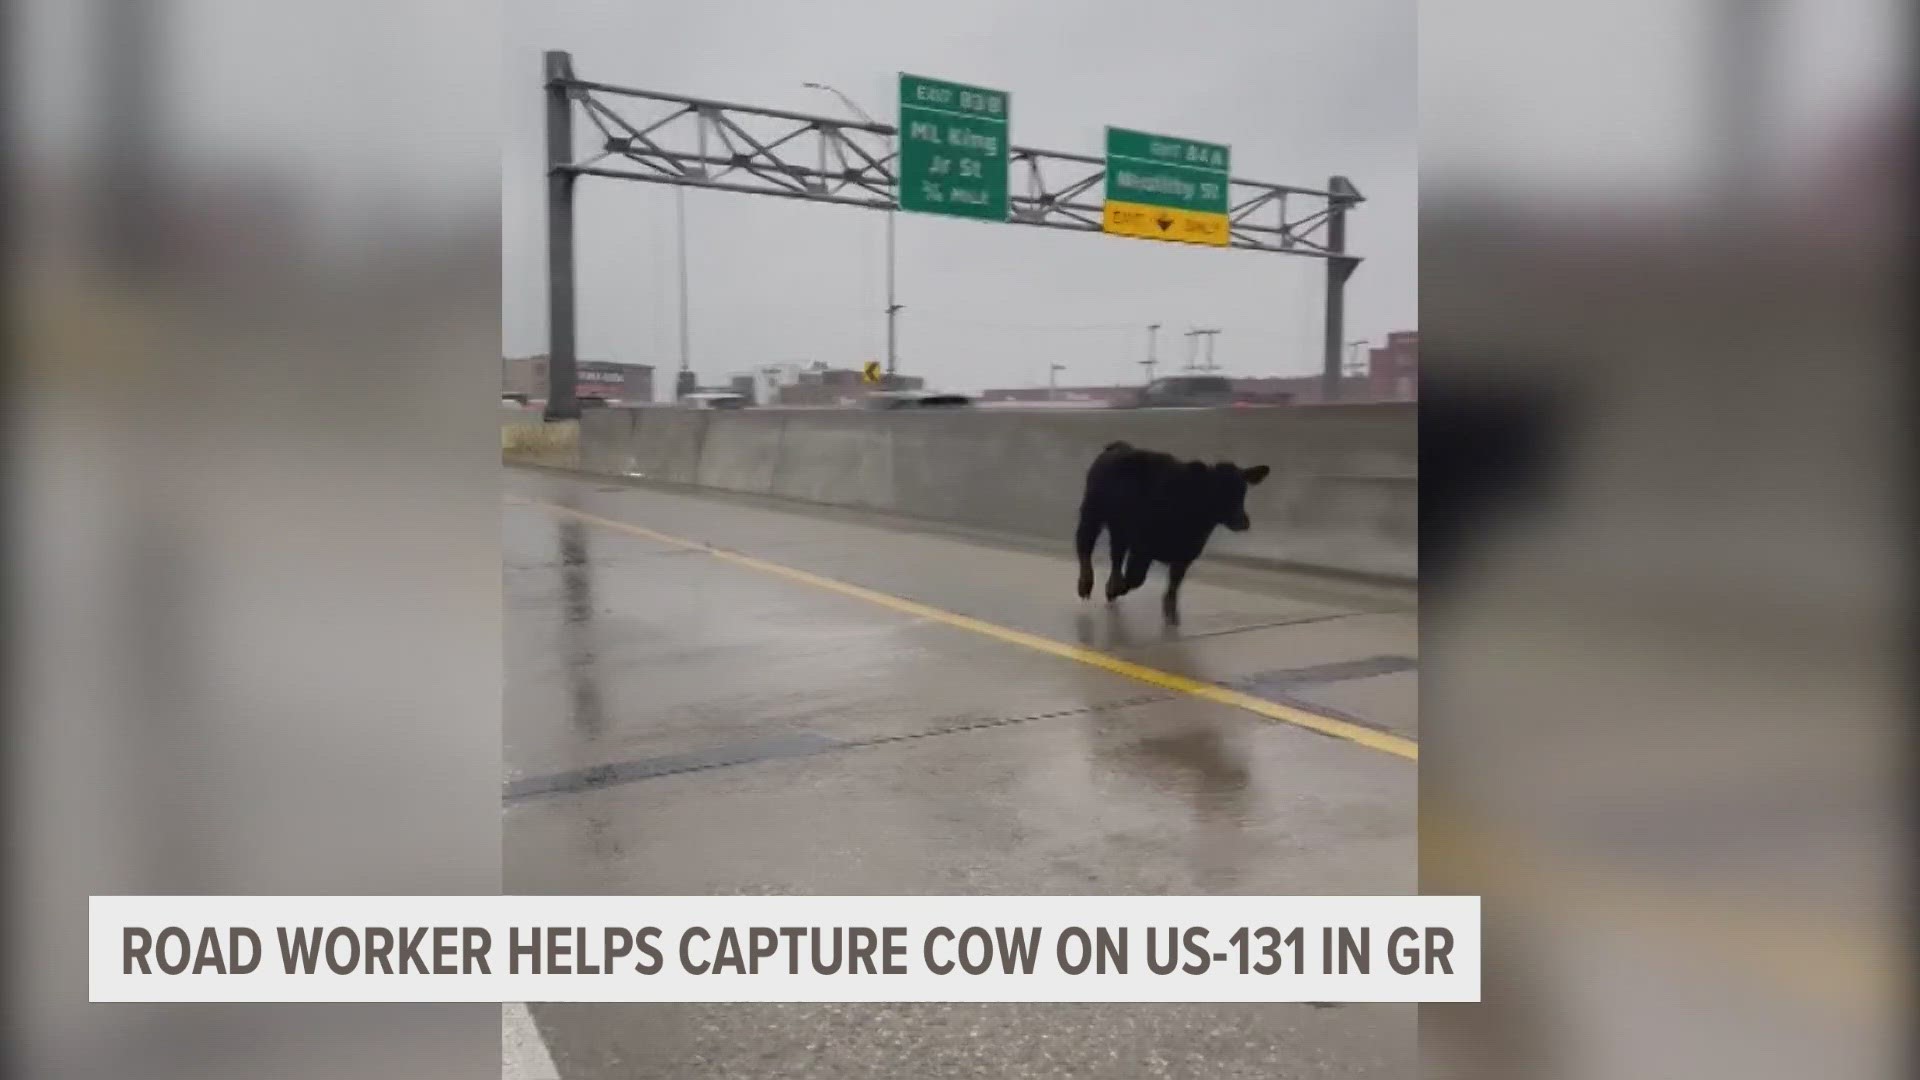 Police say a driver on US-131 was driving with a trailer of six cows when one got out and started running across the lanes.